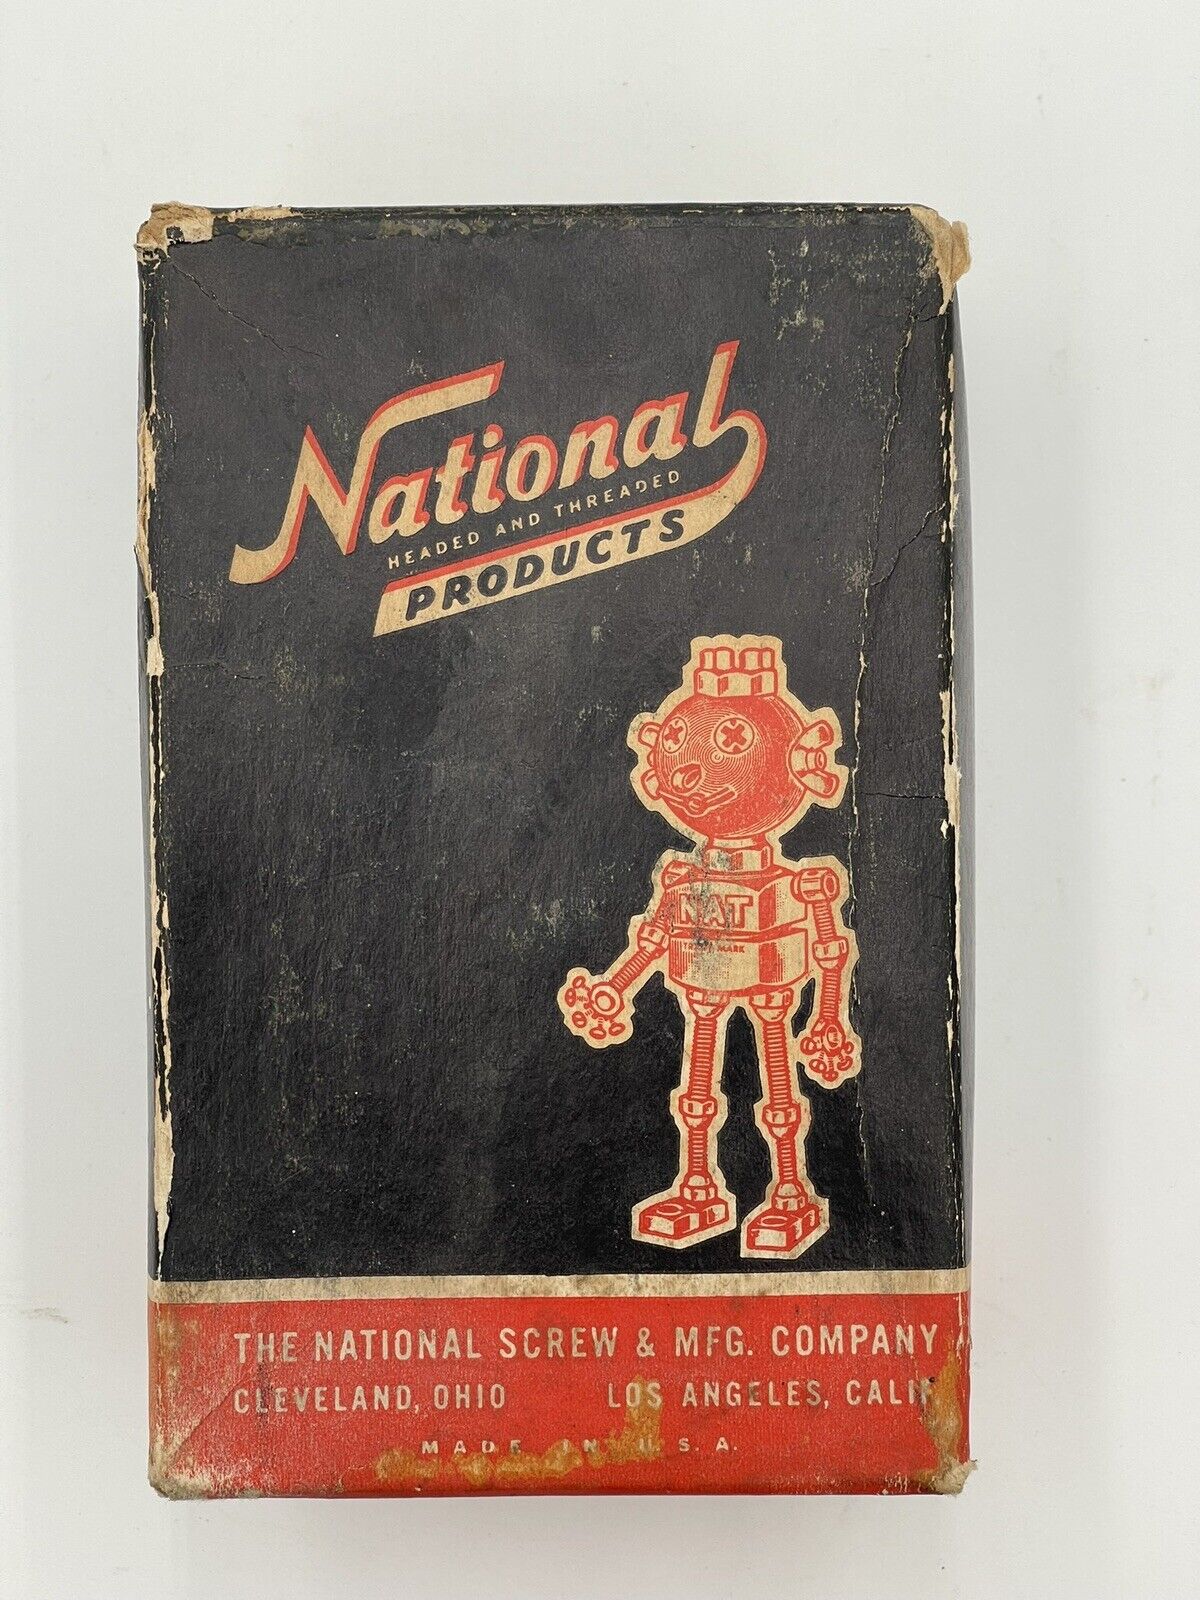 Vintage National Screw Manufacturing Company Box Of Carriage Bolts And Nuts